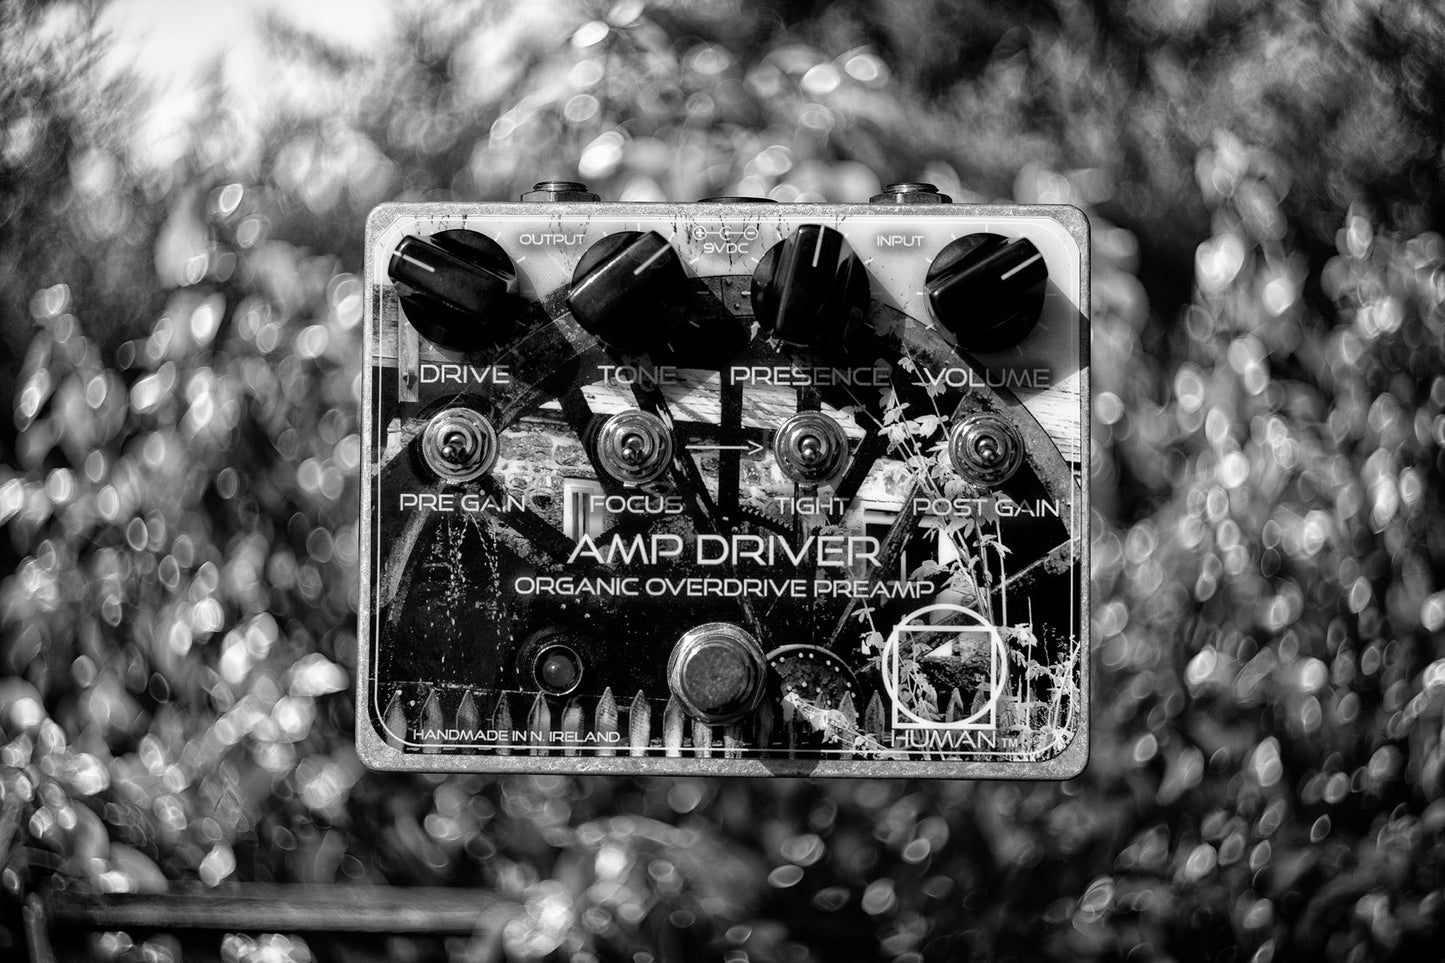 Human Amp Driver | Organic Overdrive Preamp + Distortion Pedal